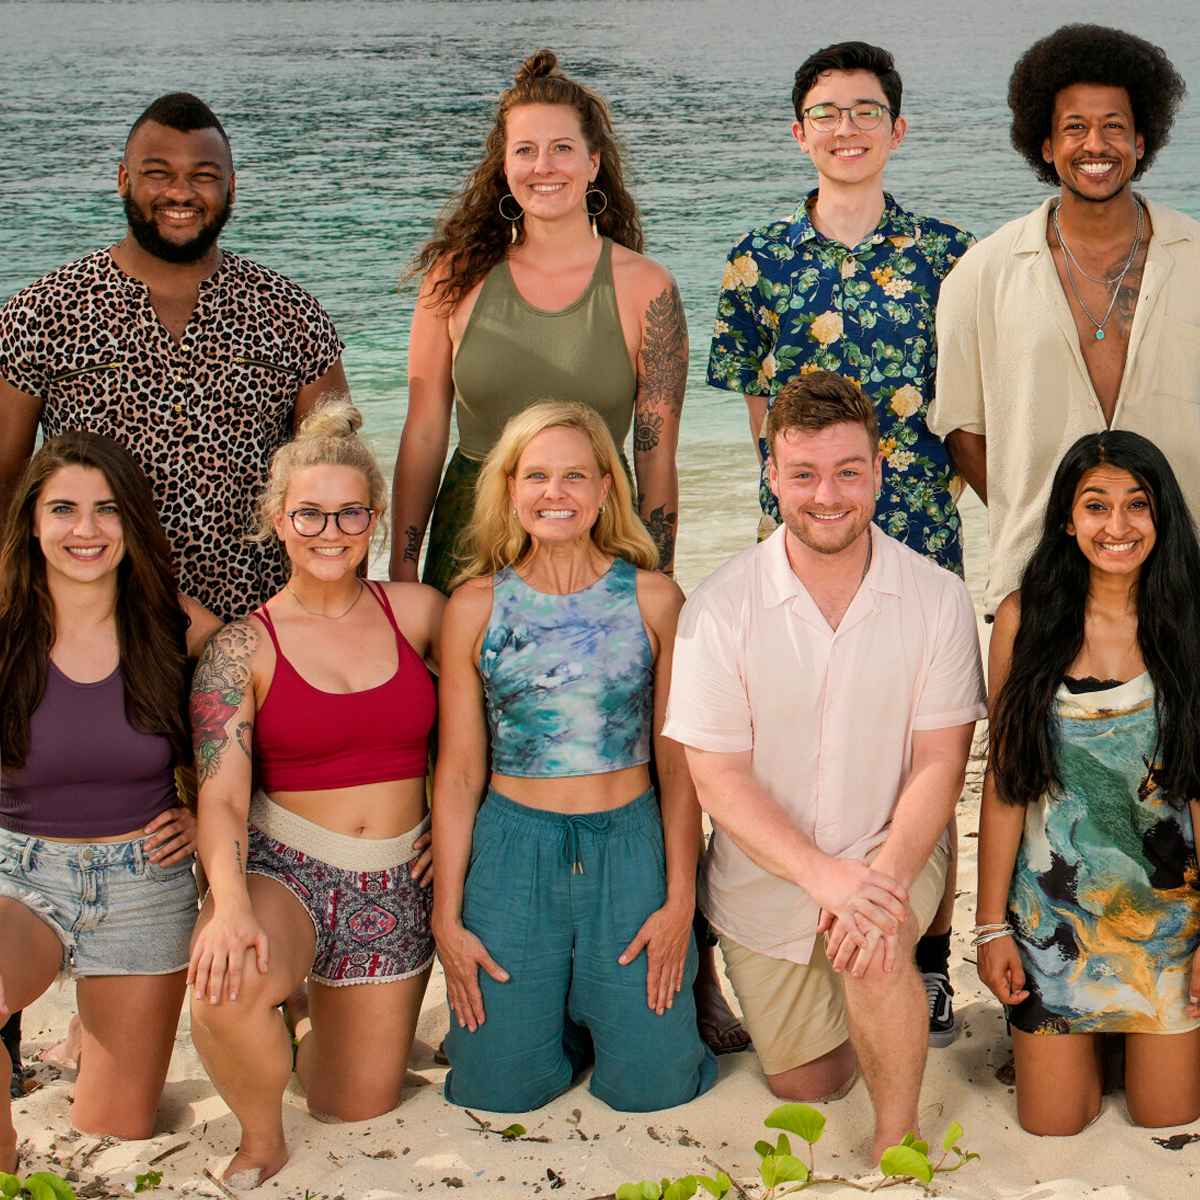 How to watch Survivor season 45 online: Release date and time